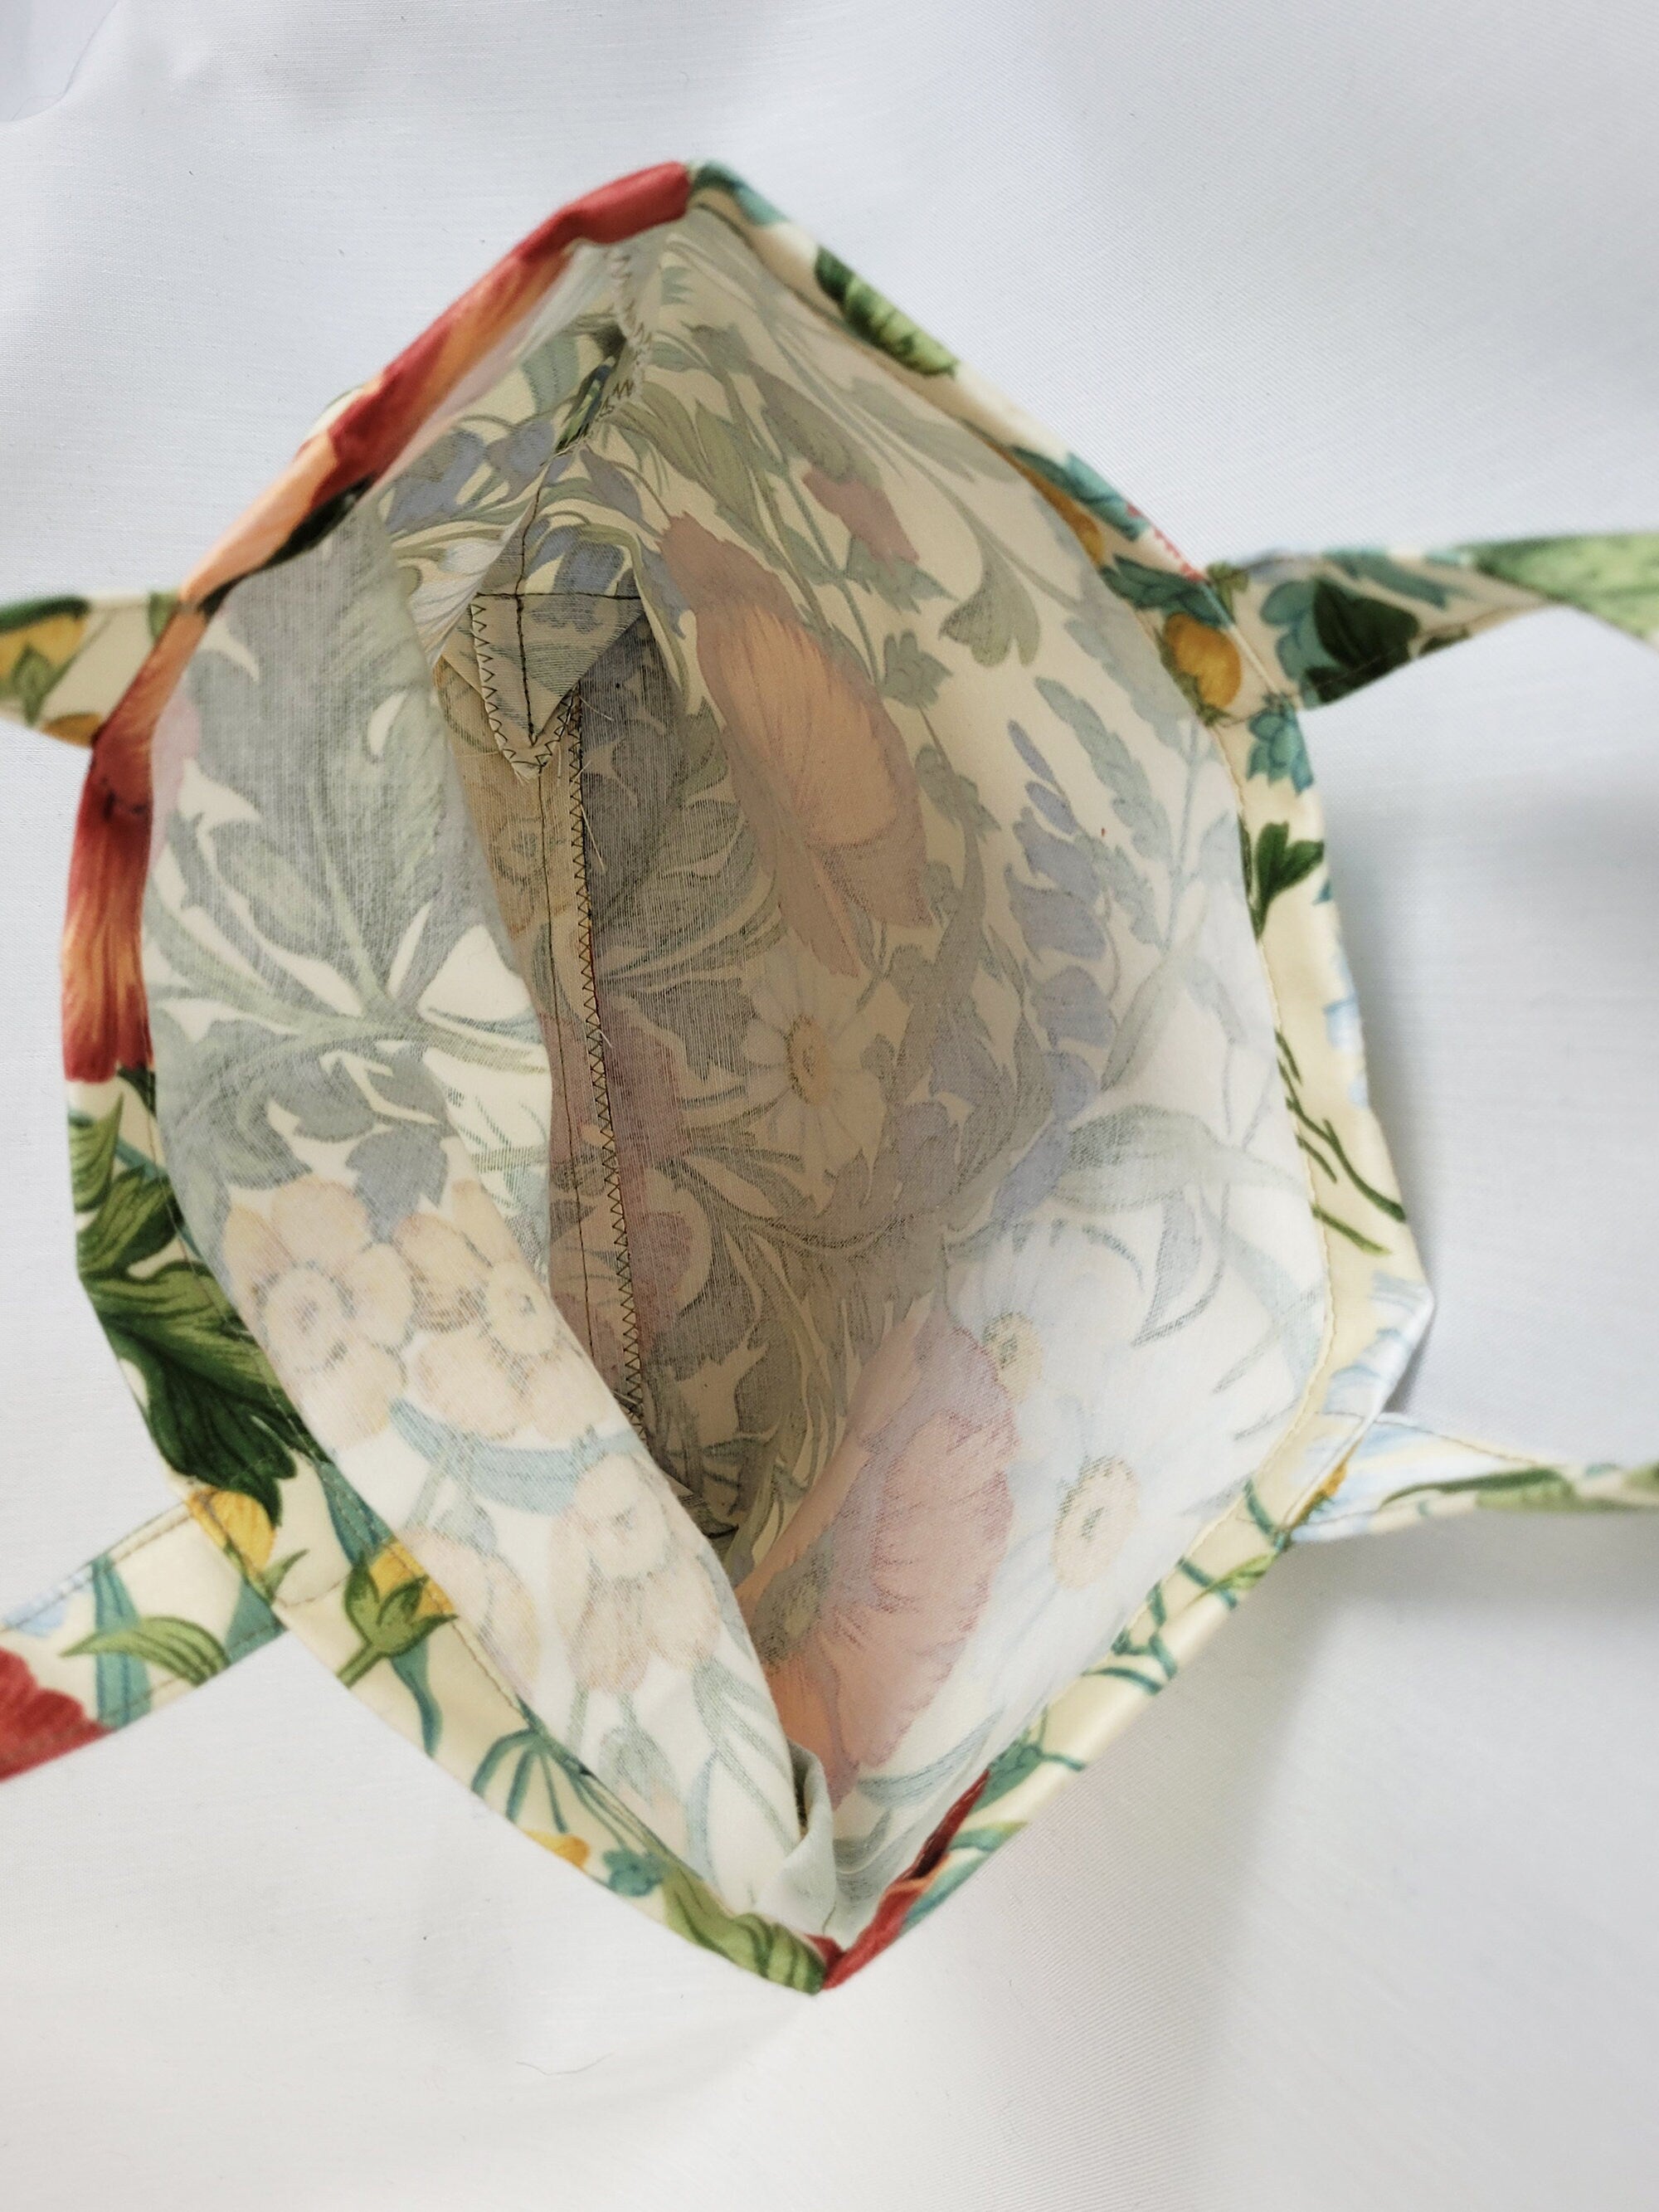 Vintage 90s floral print square small tote bag